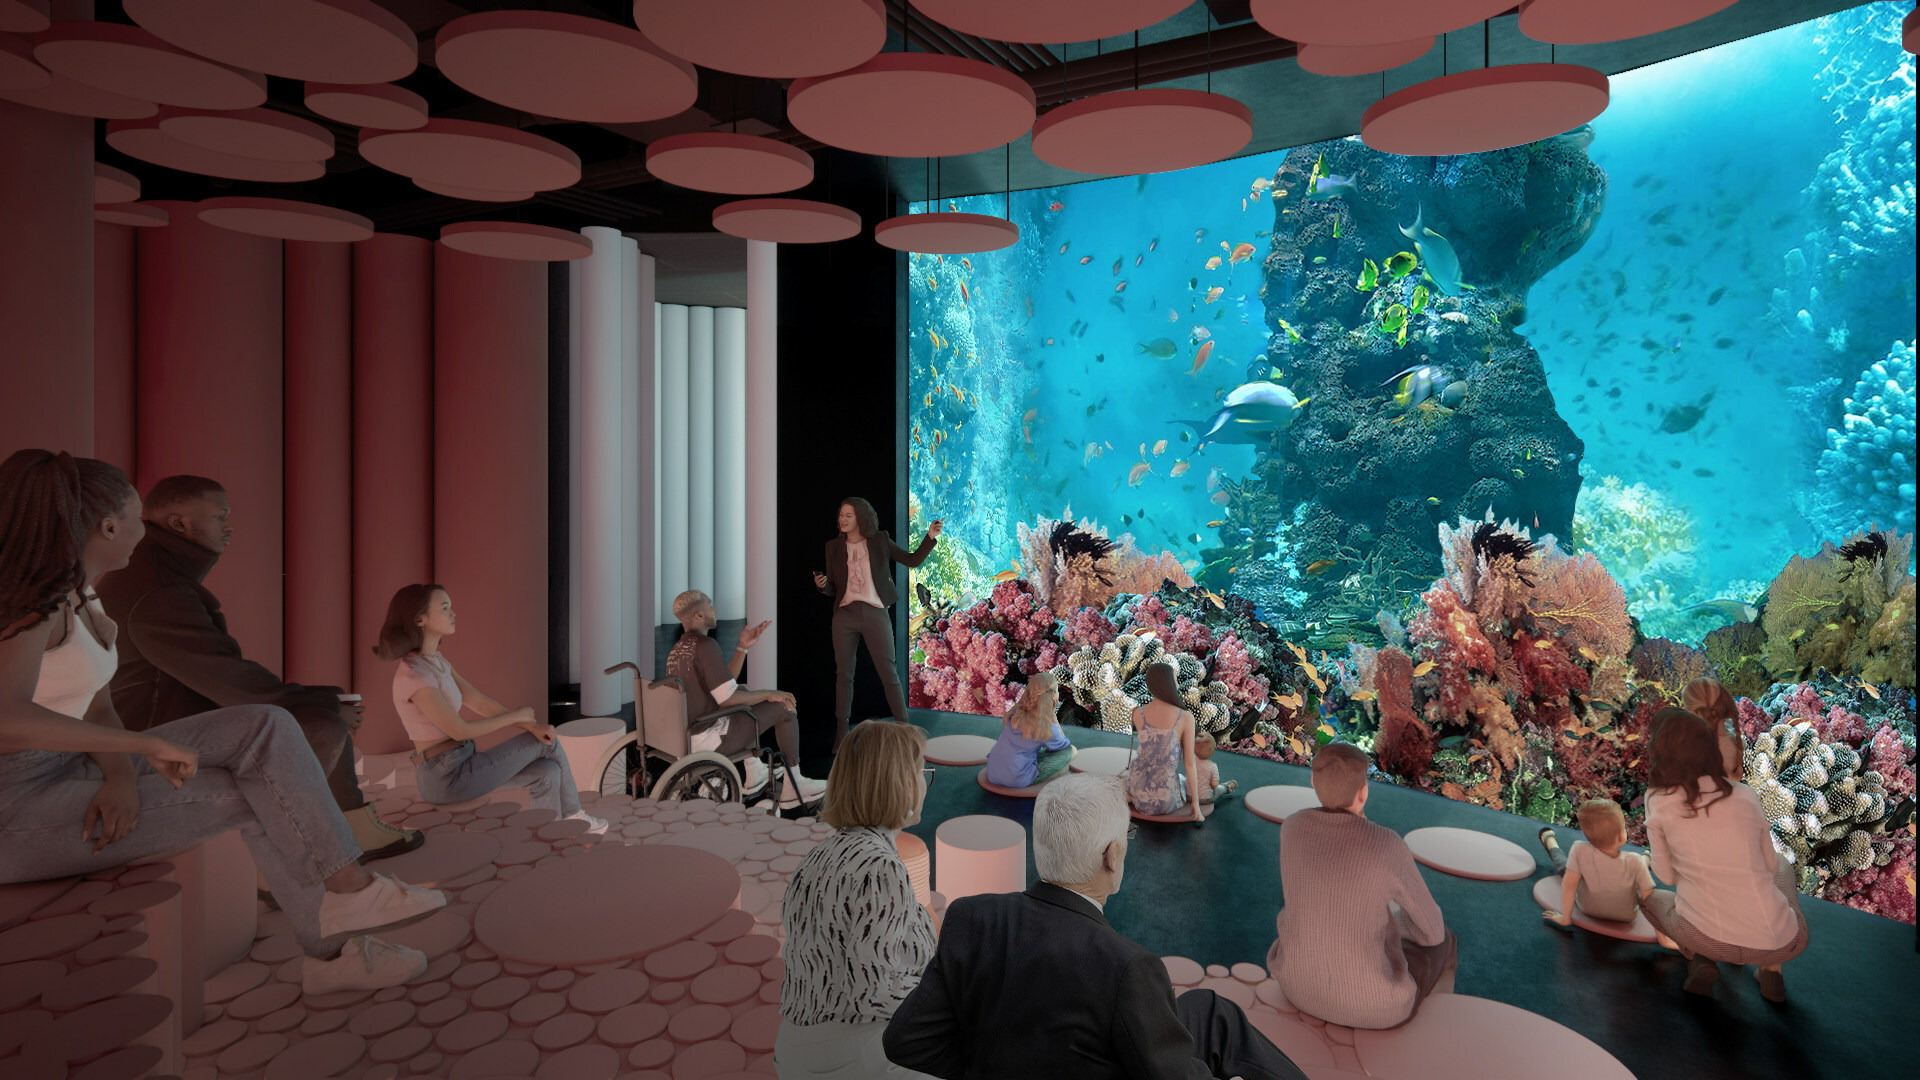 The future Aquarium de Montréal will lead by innovation, combining spectacular habitats and unique immersive experiences for guests of all ages and abilities. Image rendering provided by Aquarium de Montréal. (CNW Group/Groupe Écorécréo Inc.)